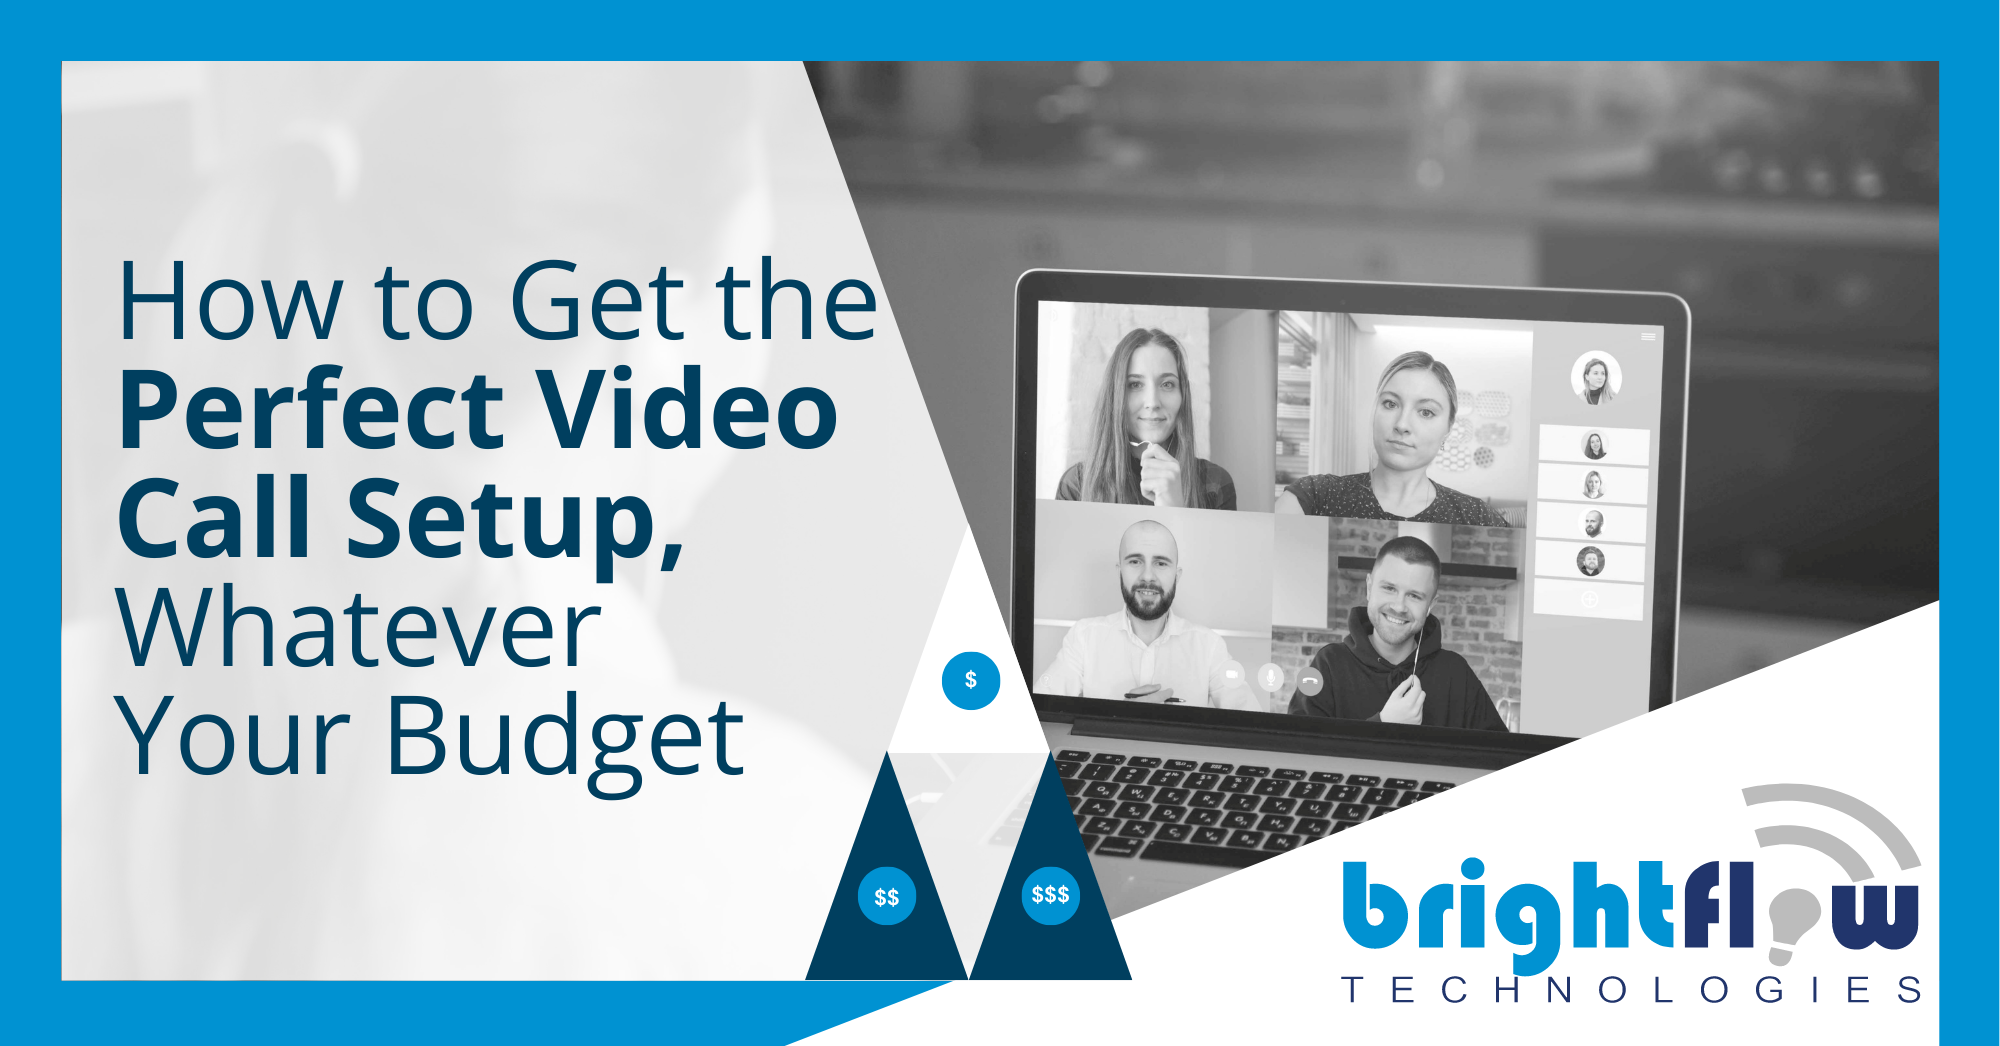 How To Get the Perfect Video Call Setup, Whatever Your Budget